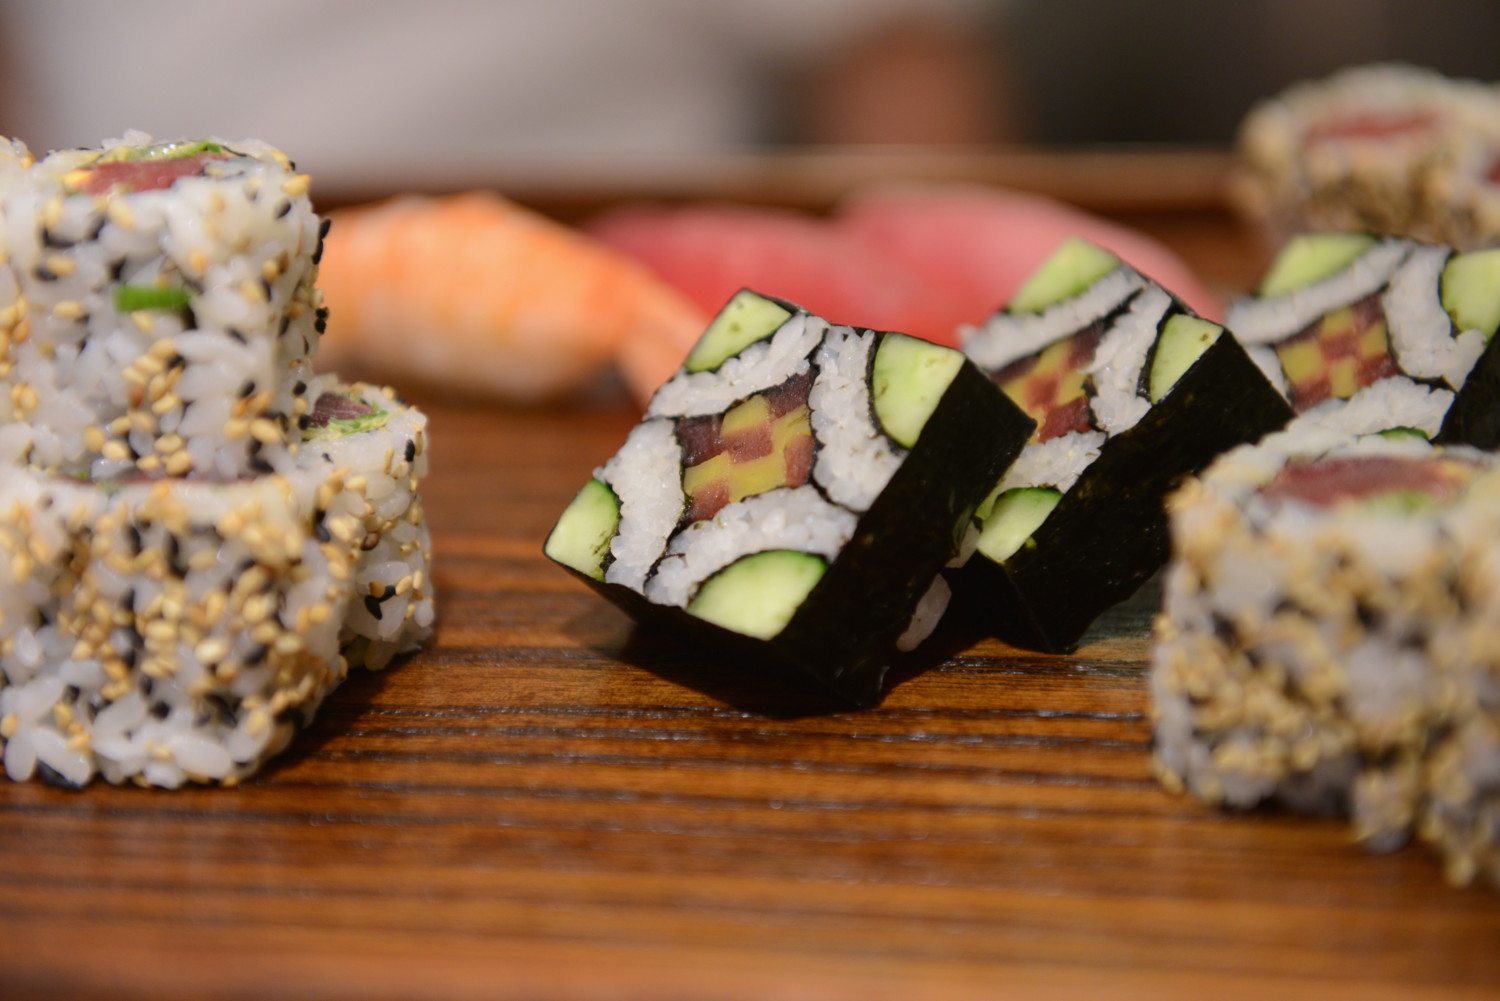 Master Sushi Rolling Class With Morimoto - Food Network New York City Wine & Food Festival Presented By FOOD & WINE